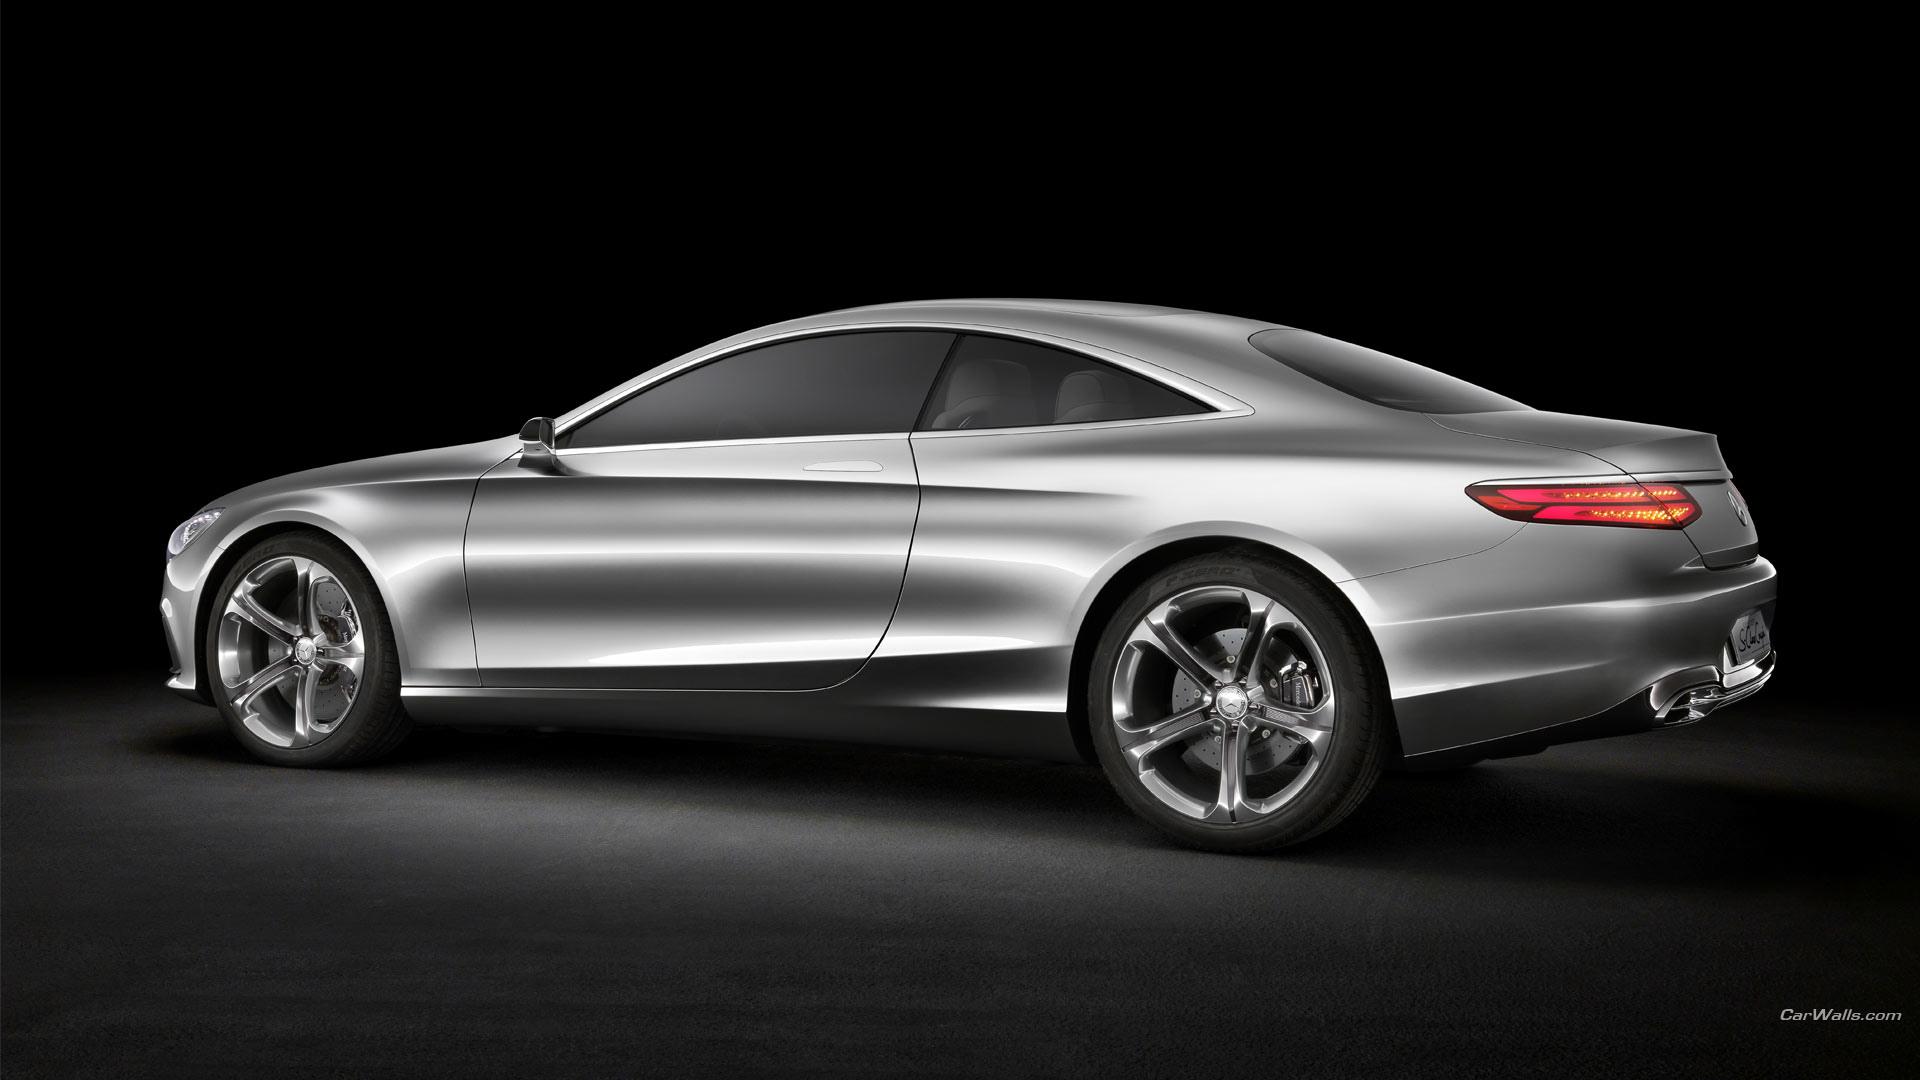 Mercedes-Benz S-Class Coupe wallpapers HD quality